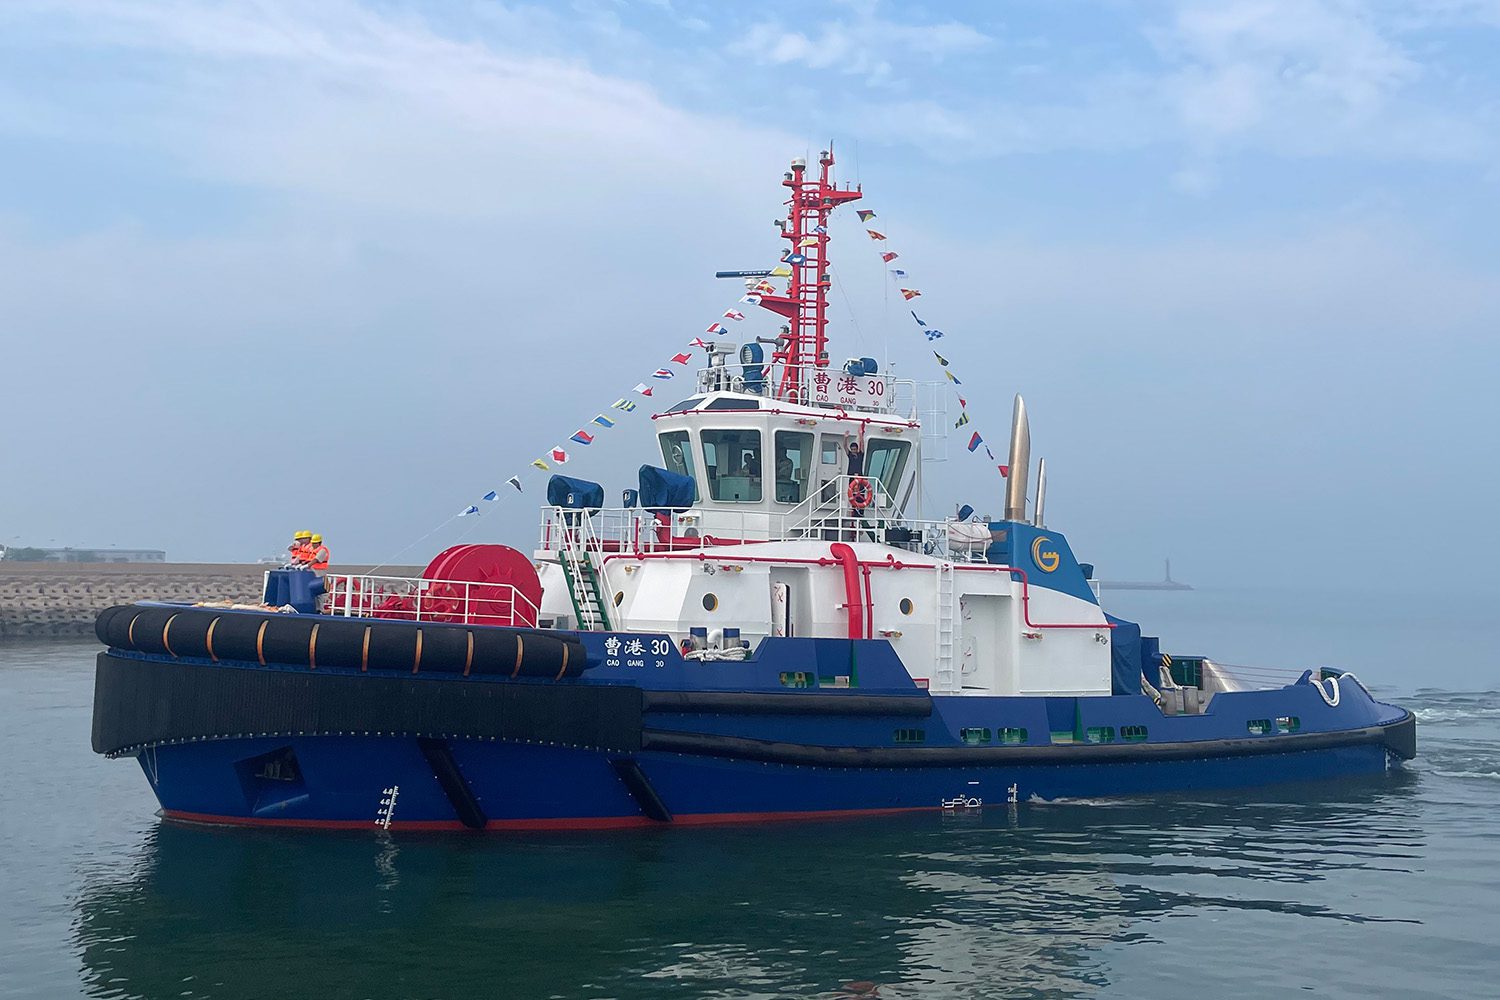 Cao Gang 30 and Cao Gang 31 RAmparts 3500 Tugs arrive at Caofeidian Port in Northern China